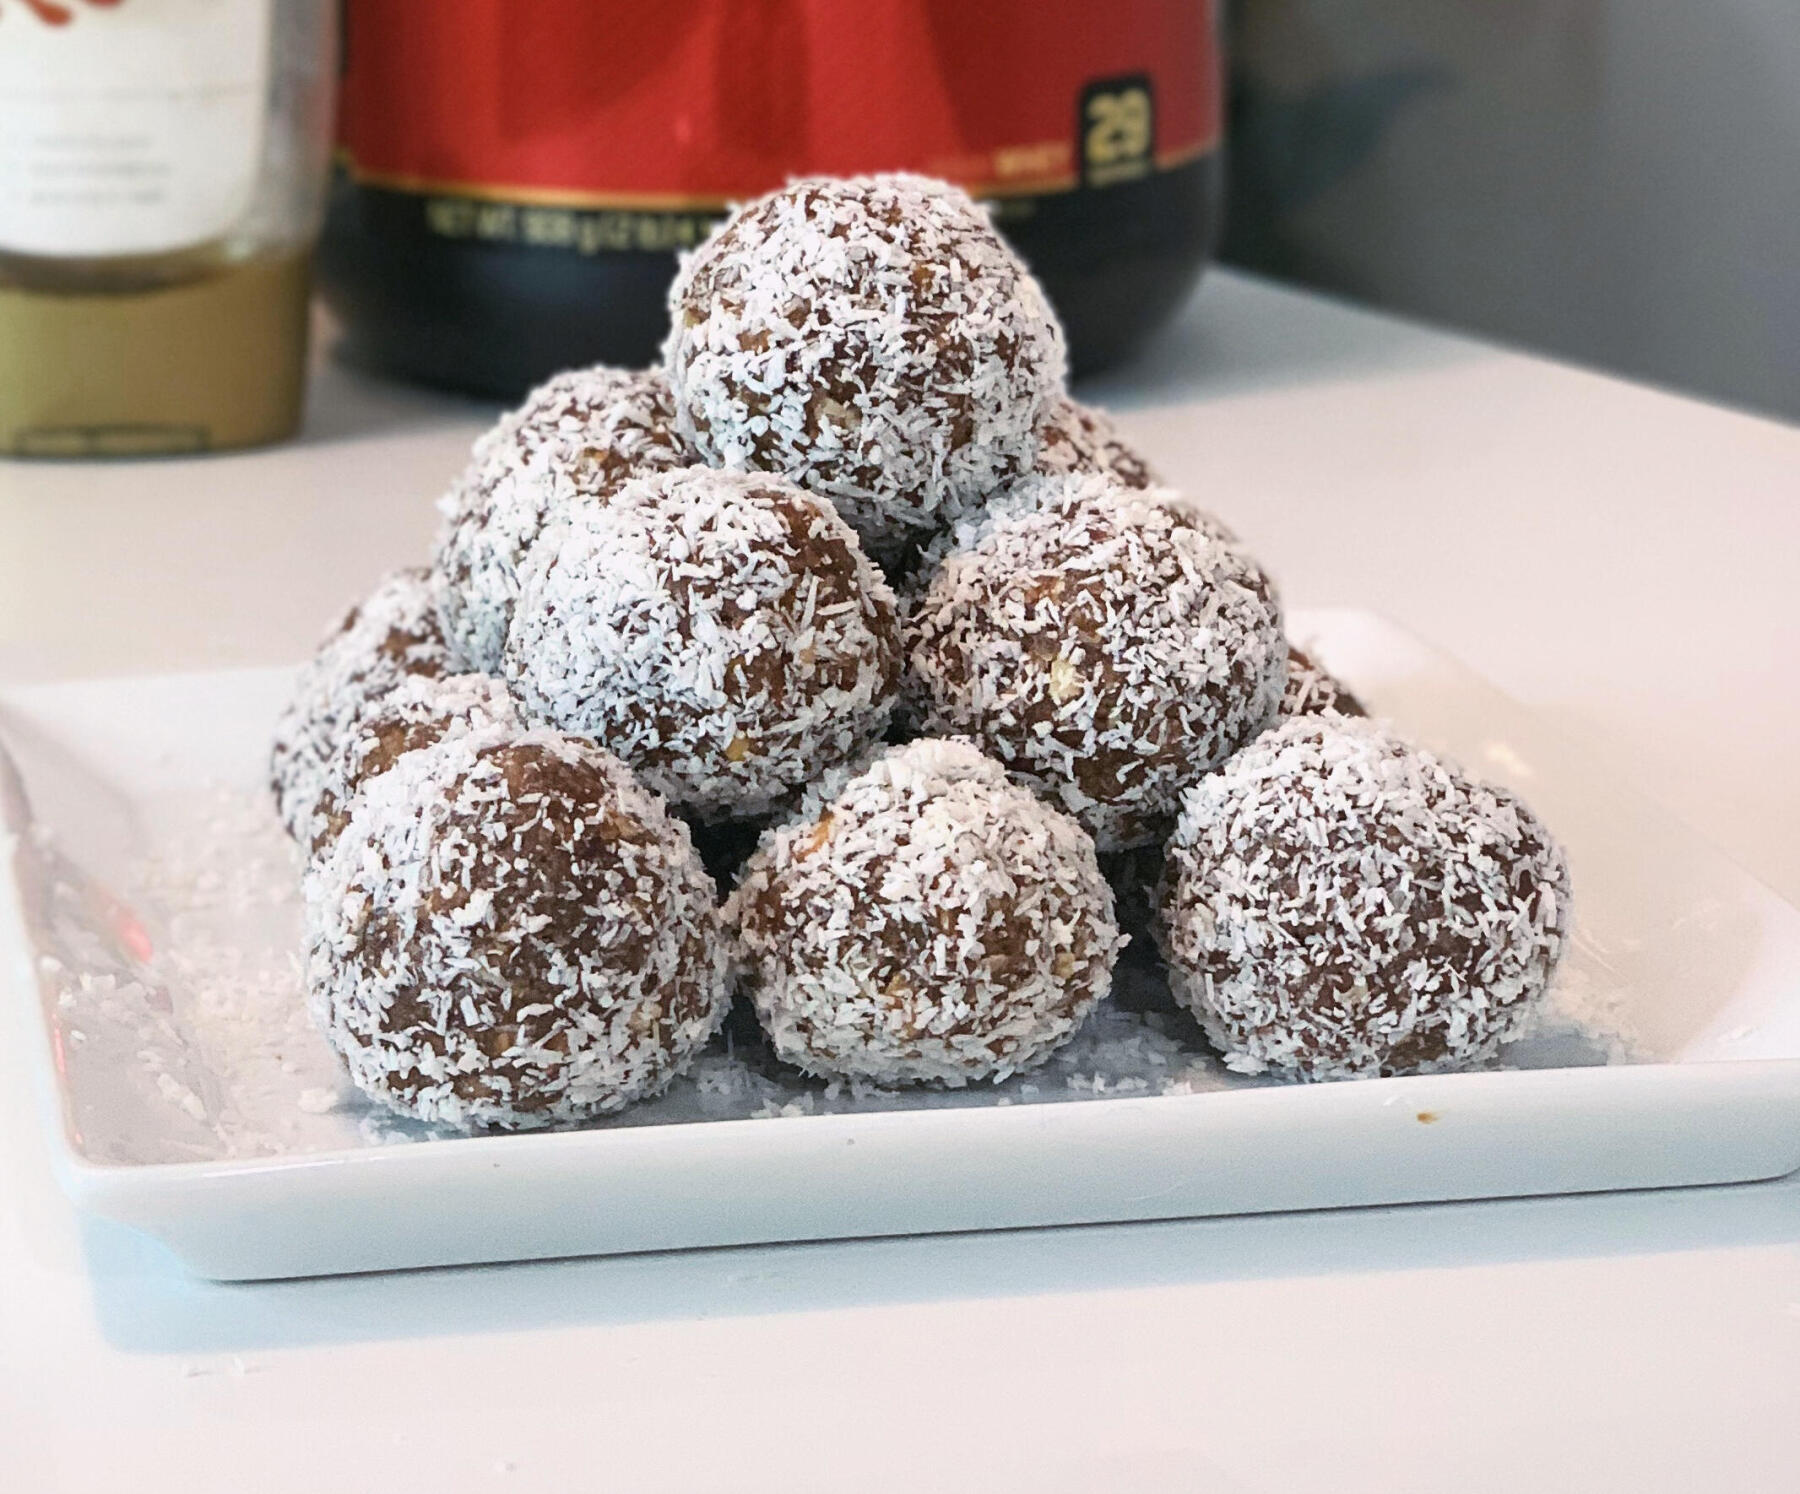 energy protein balls tiphaine charles